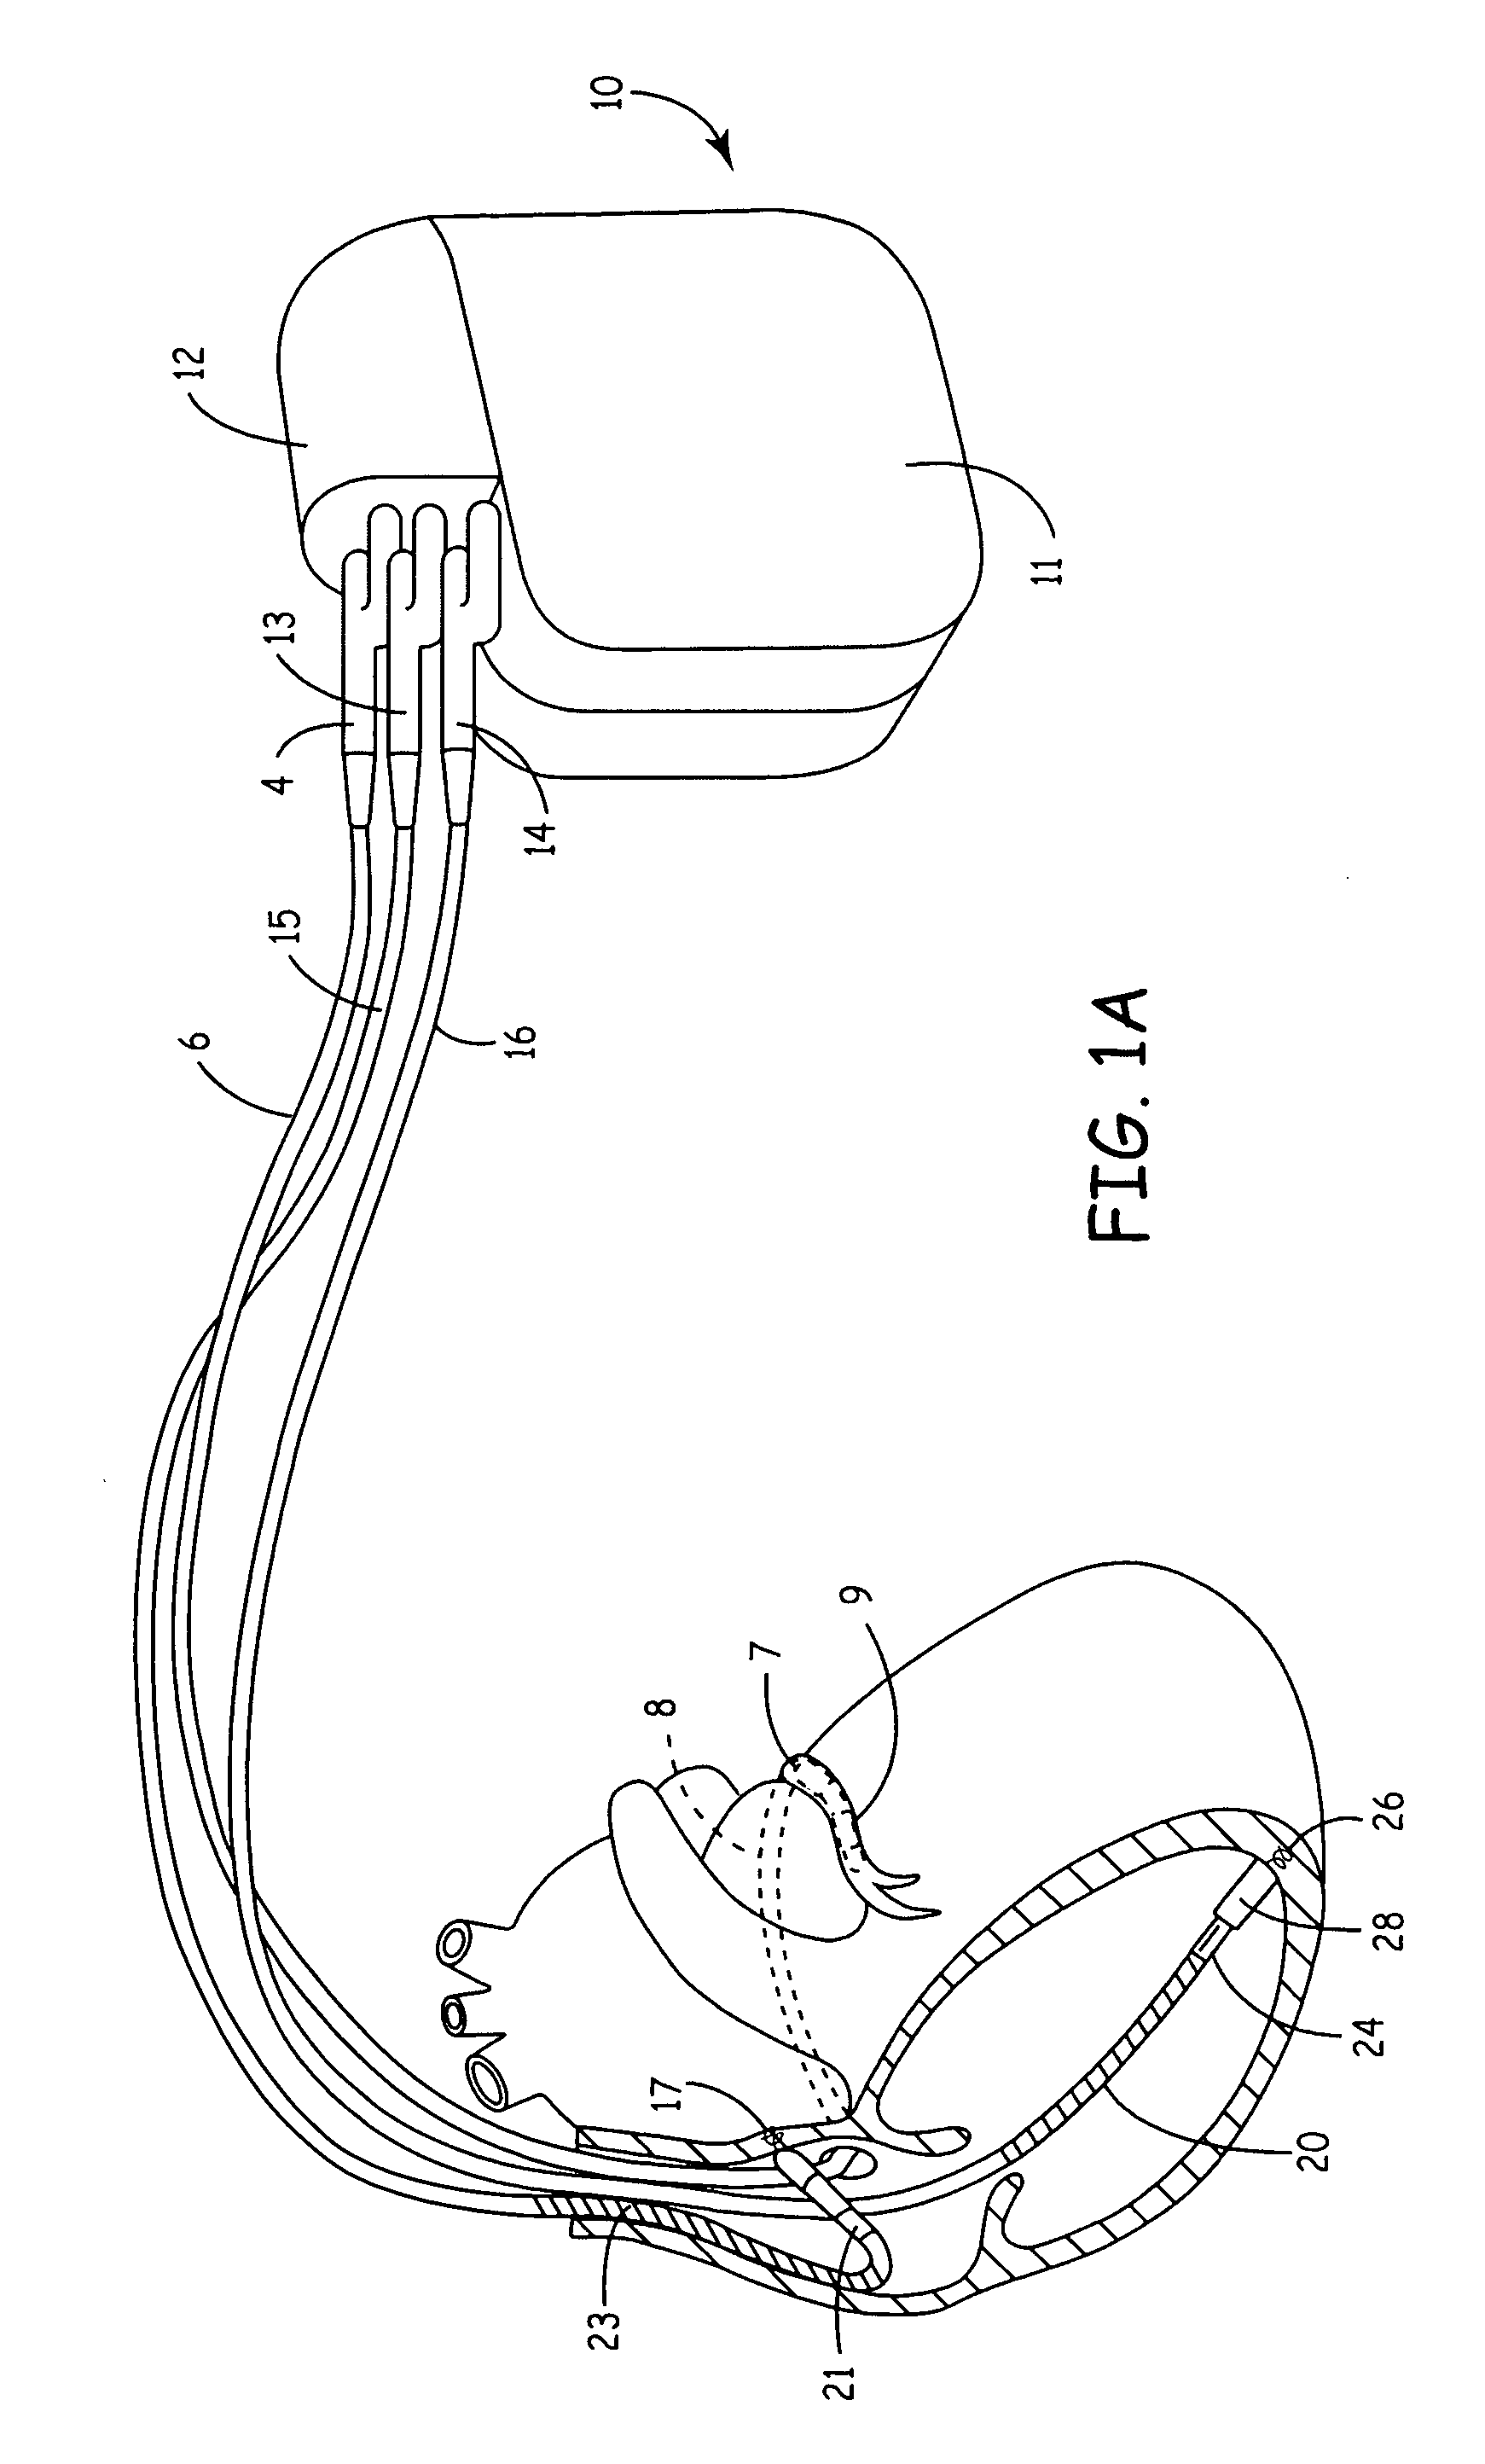 Method and apparatus for controlling extra-systolic stimulation (ESS) therapy using ischemia detection